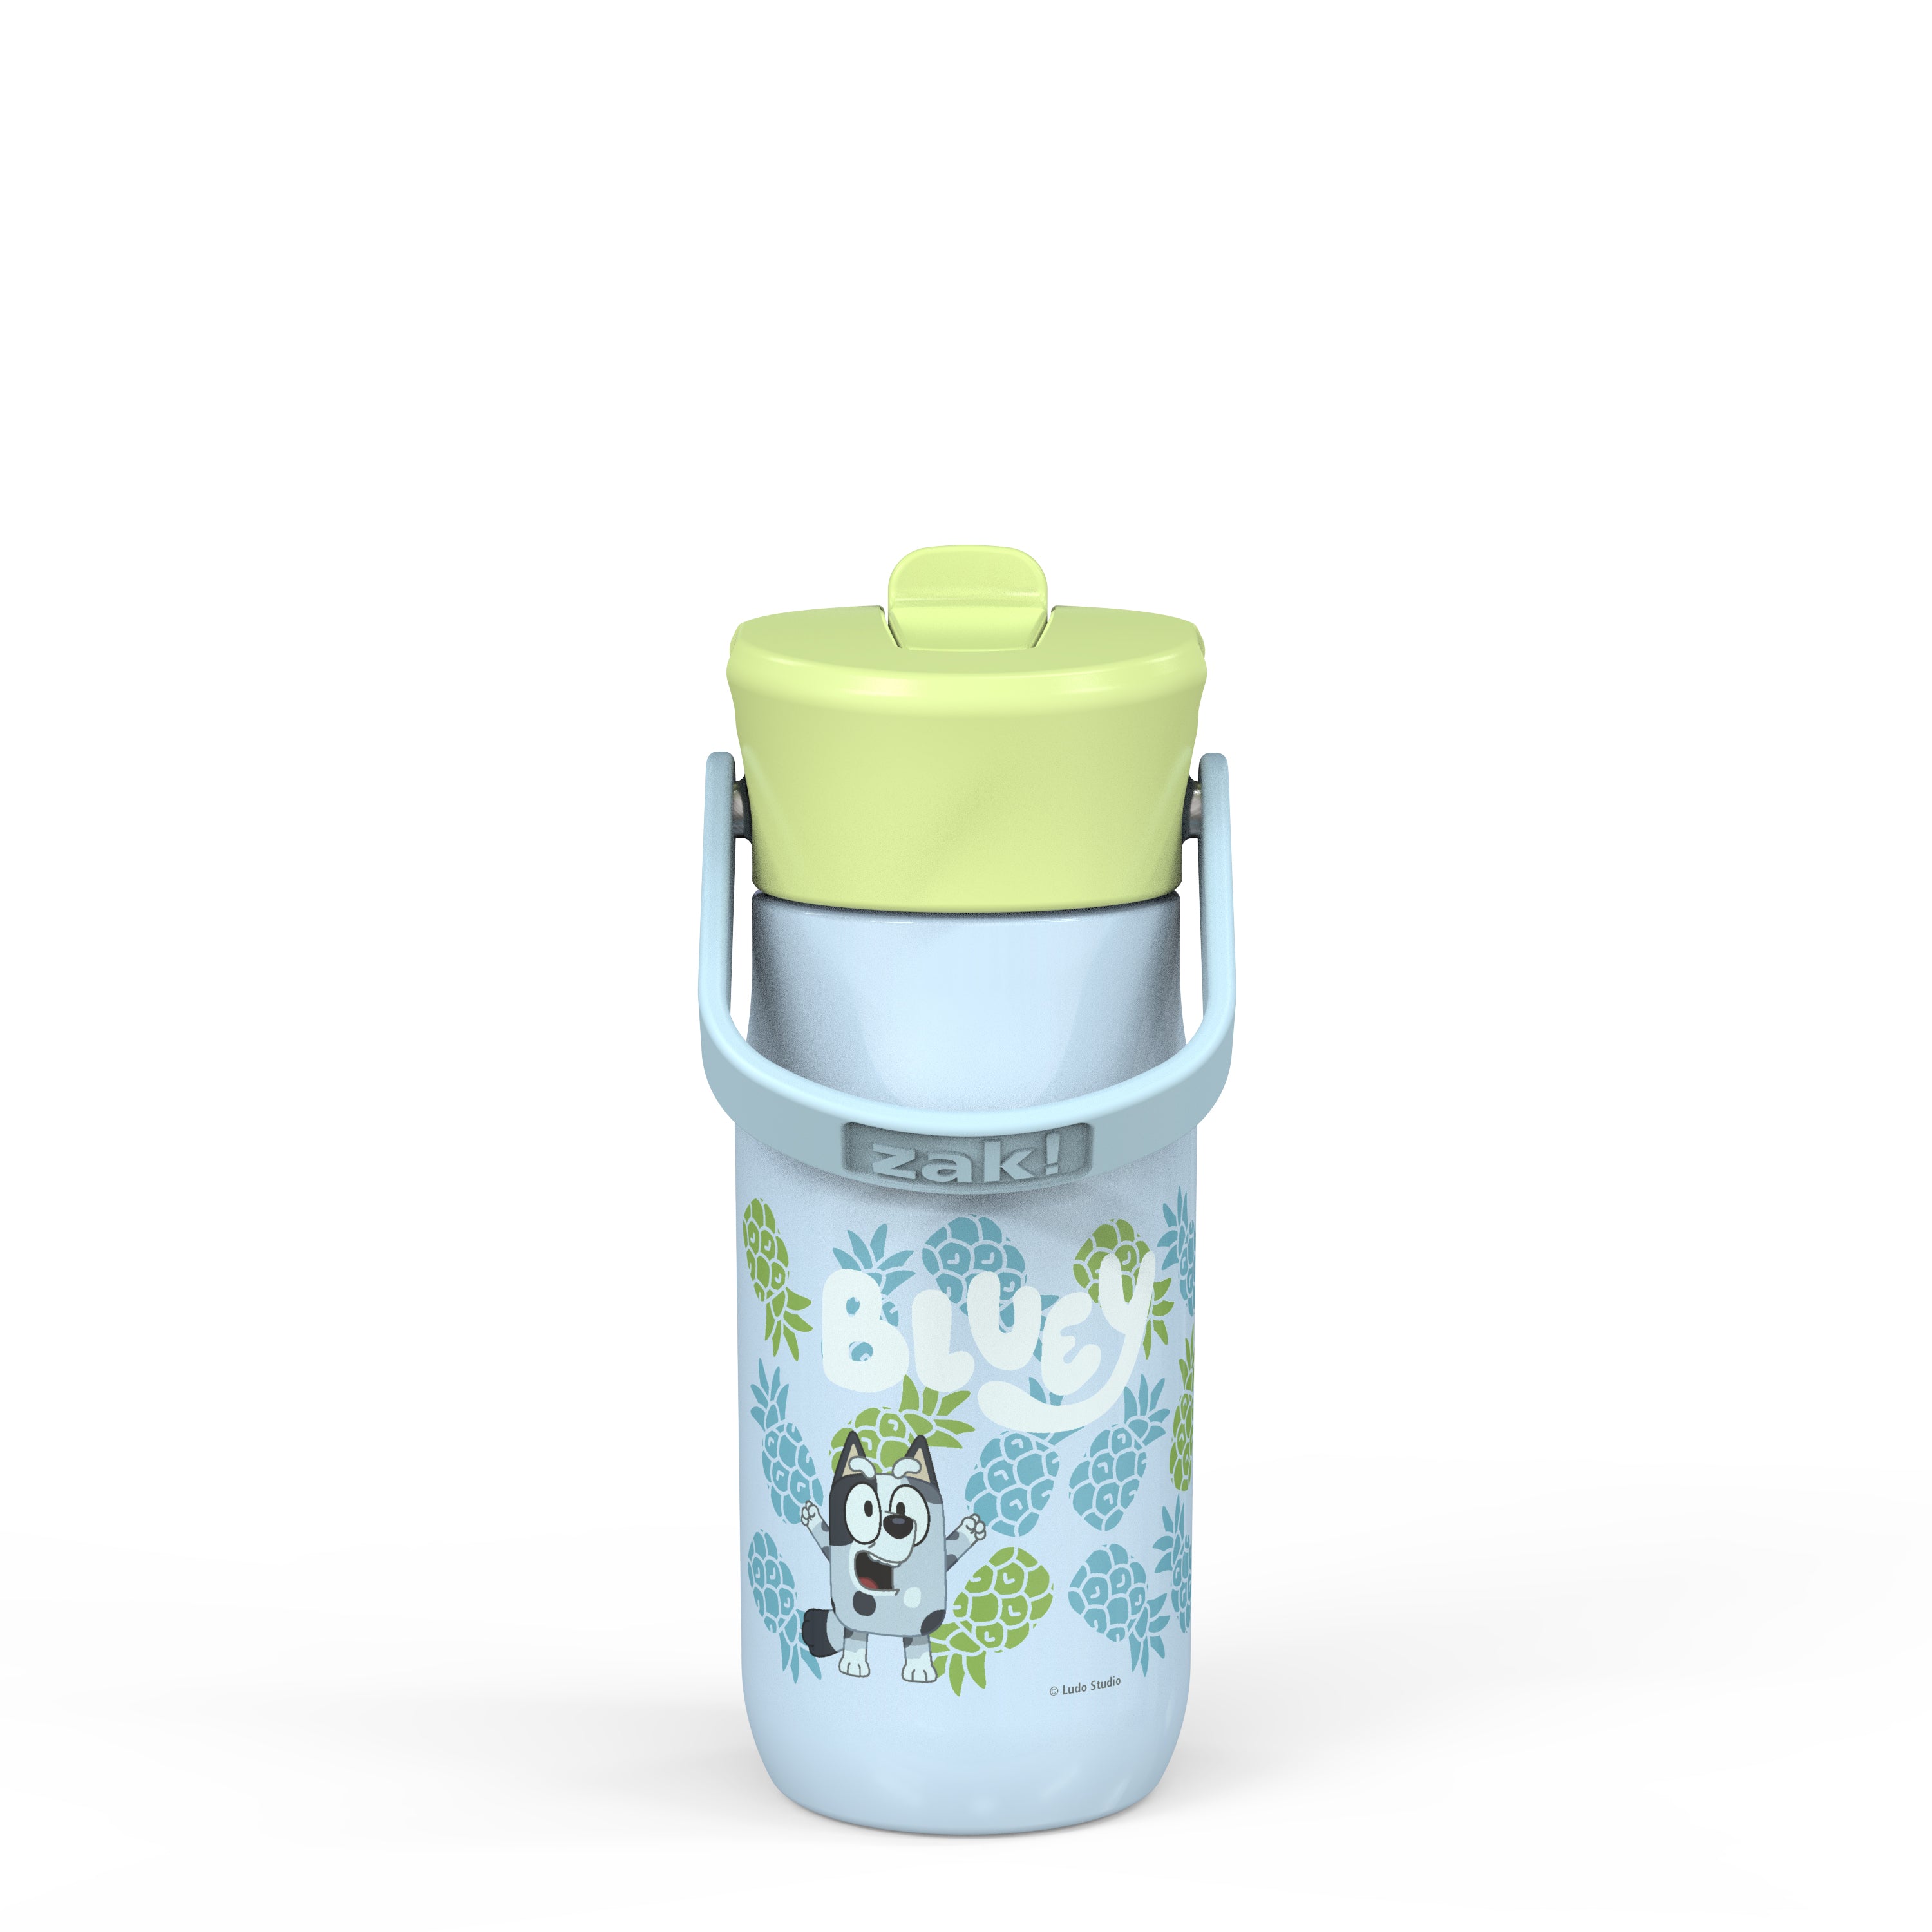 Bluey Harmony Recycled Stainless Steel Kids Water Bottle with Straw Spout, 14 ounces